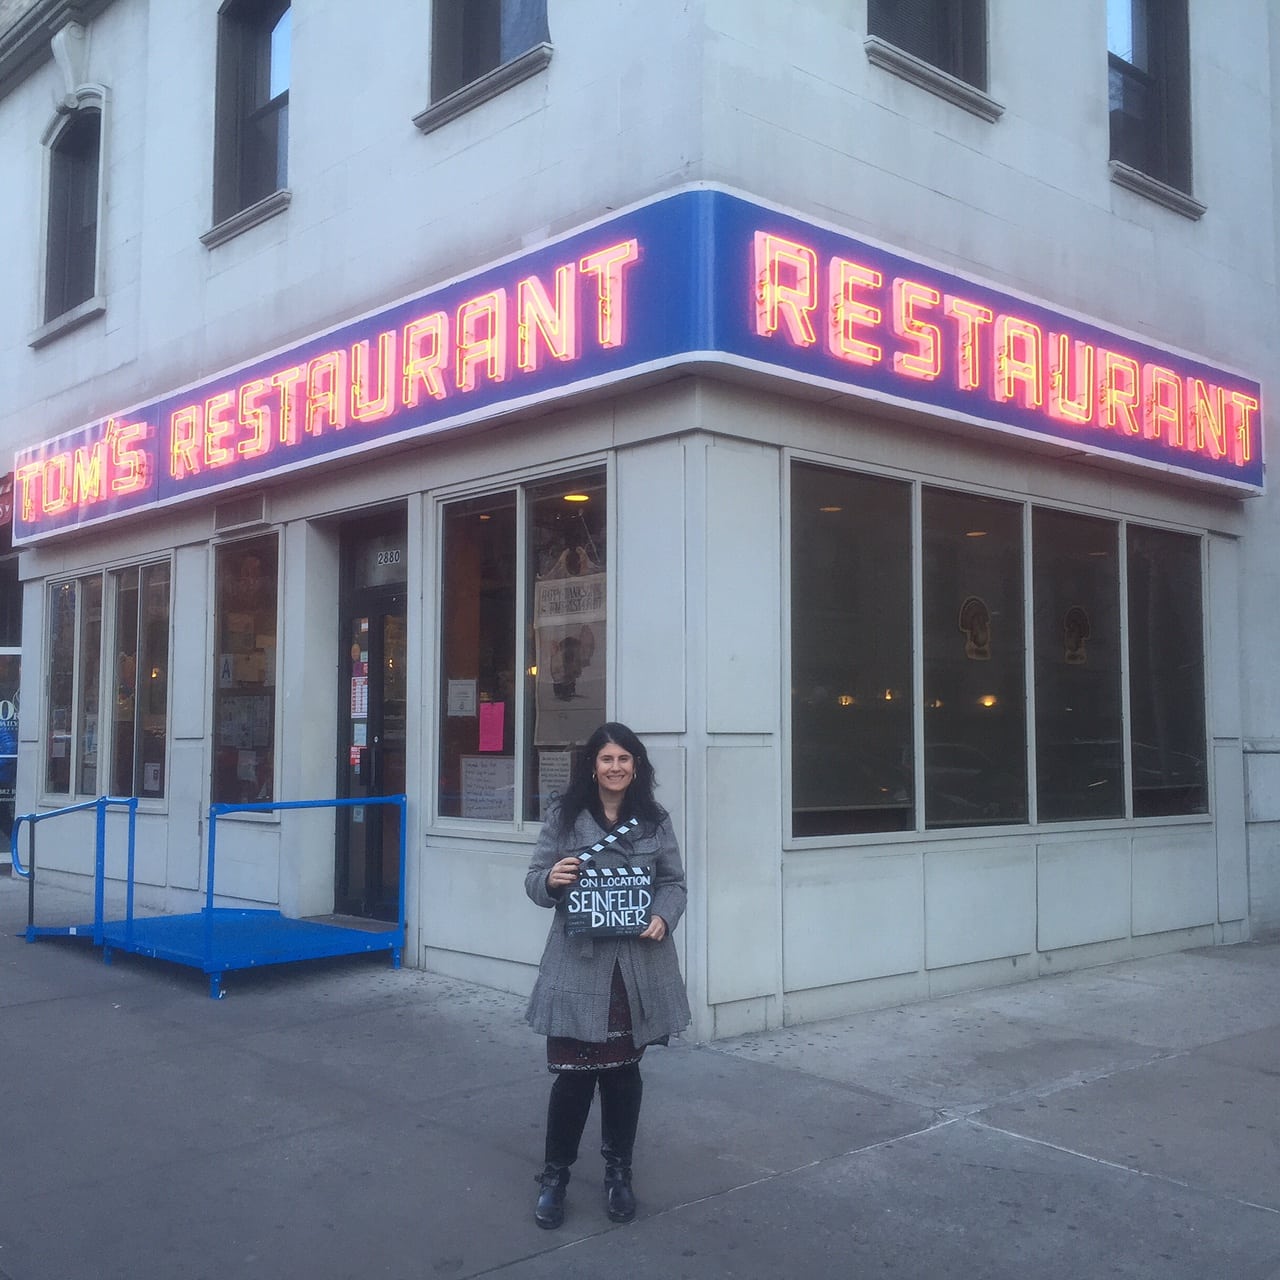 When Harry Met Seinfeld, A NYC Movie & TV Tour